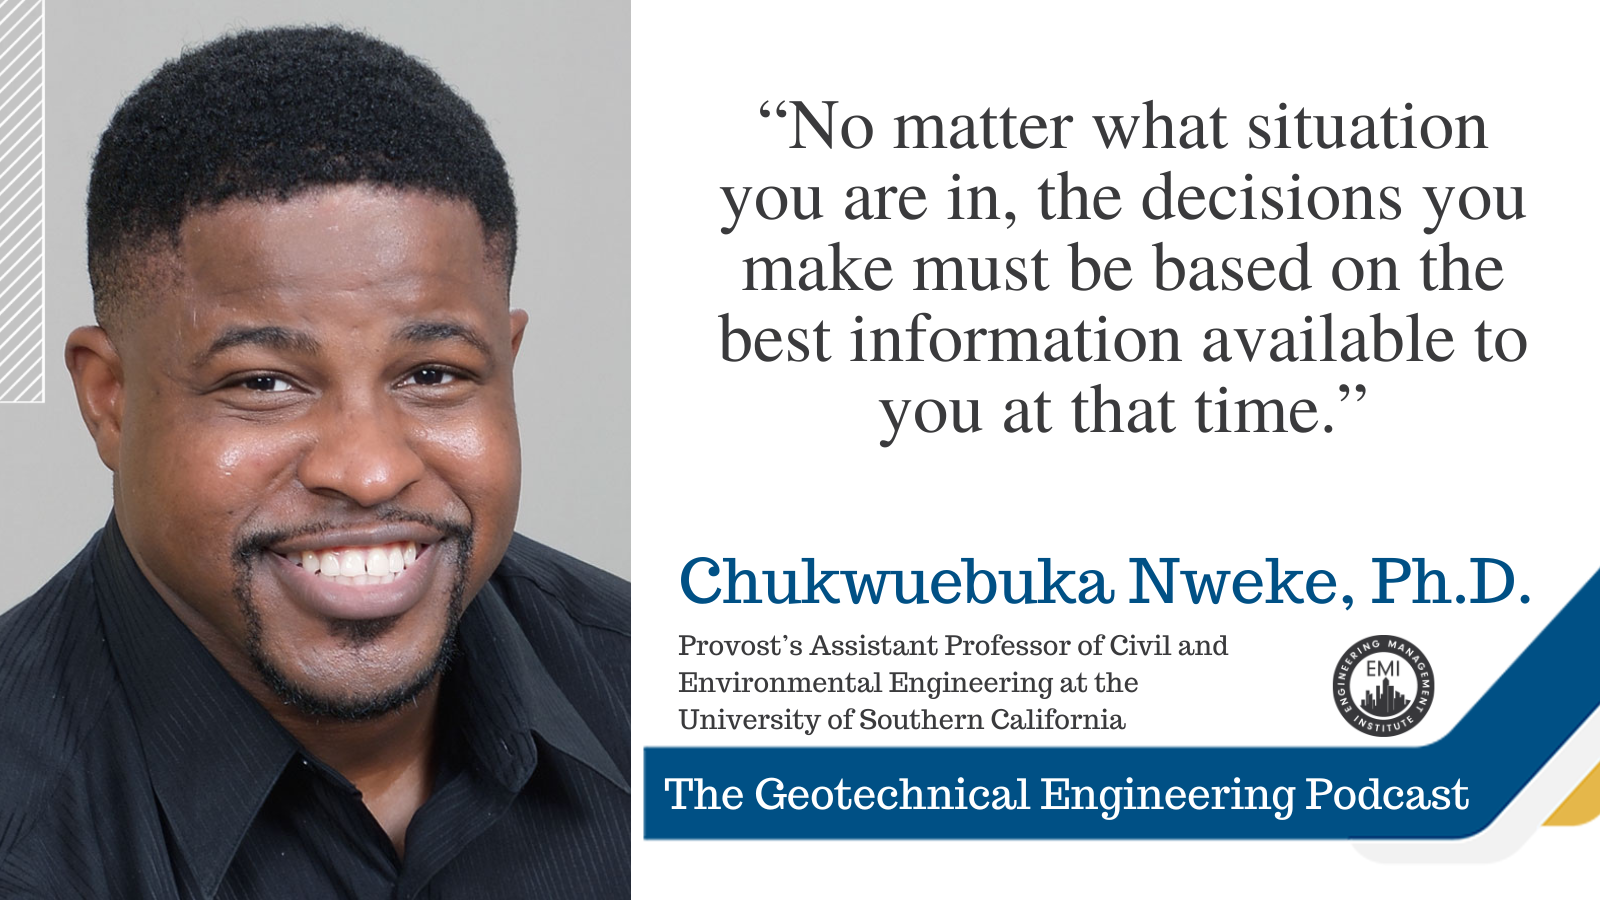 Prof. Nweke Invited to Speak about Seismic Hazards and the Impacts on Our Infrastructure on The Geotechnical Engineering Podcast